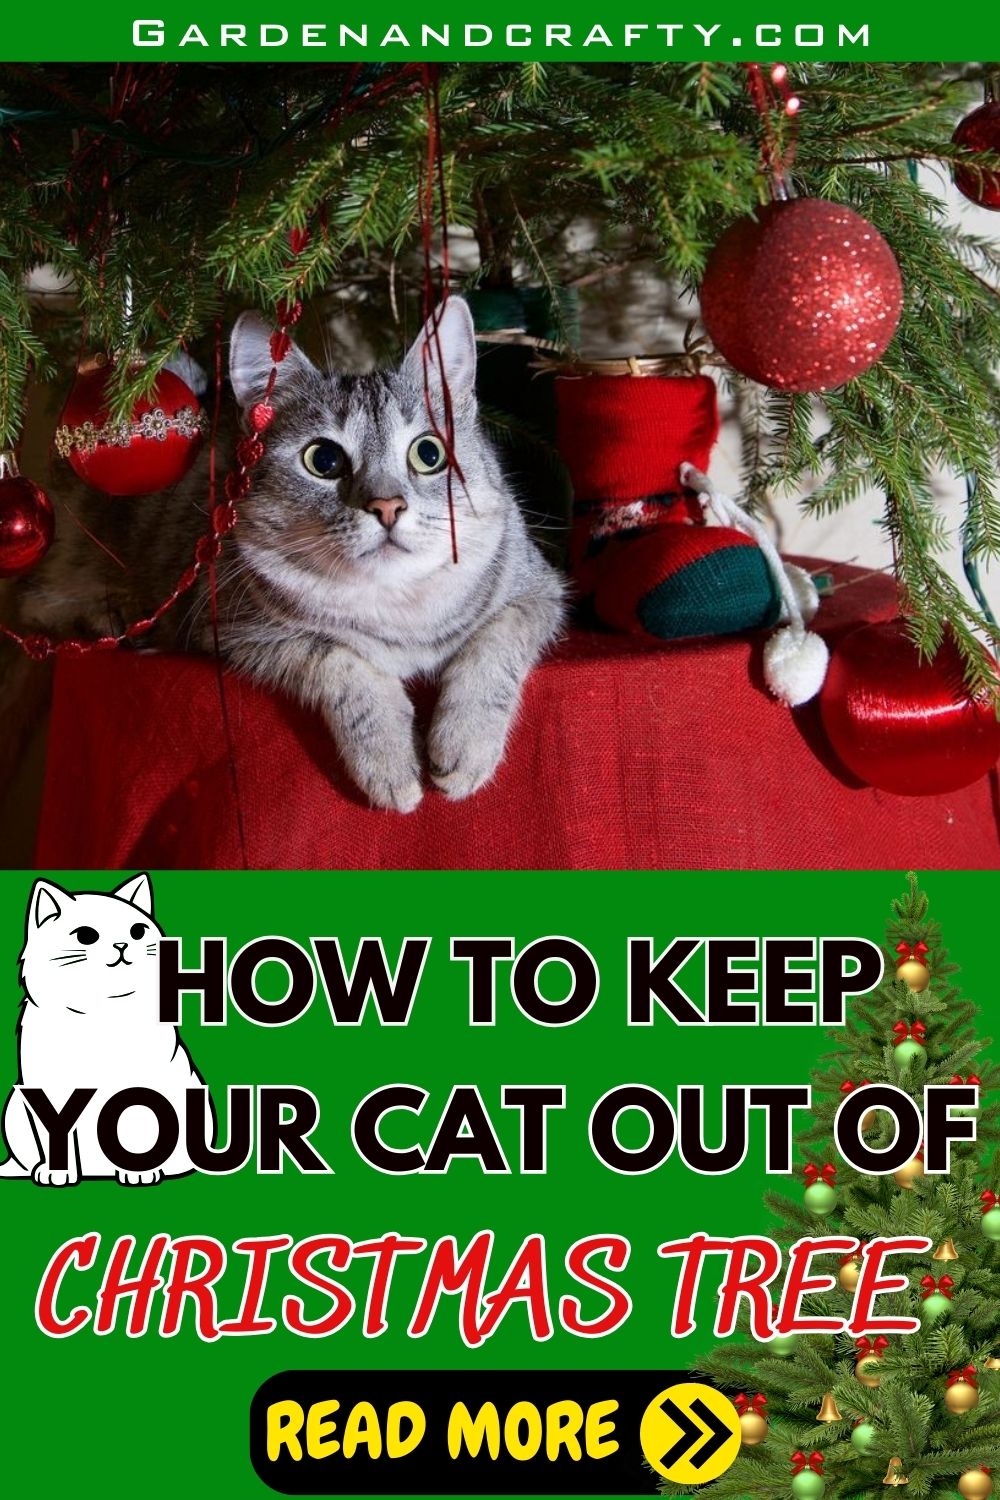 How To Keep Your Cat Out Of The Christmas Tree: 7 Tips And Tricks